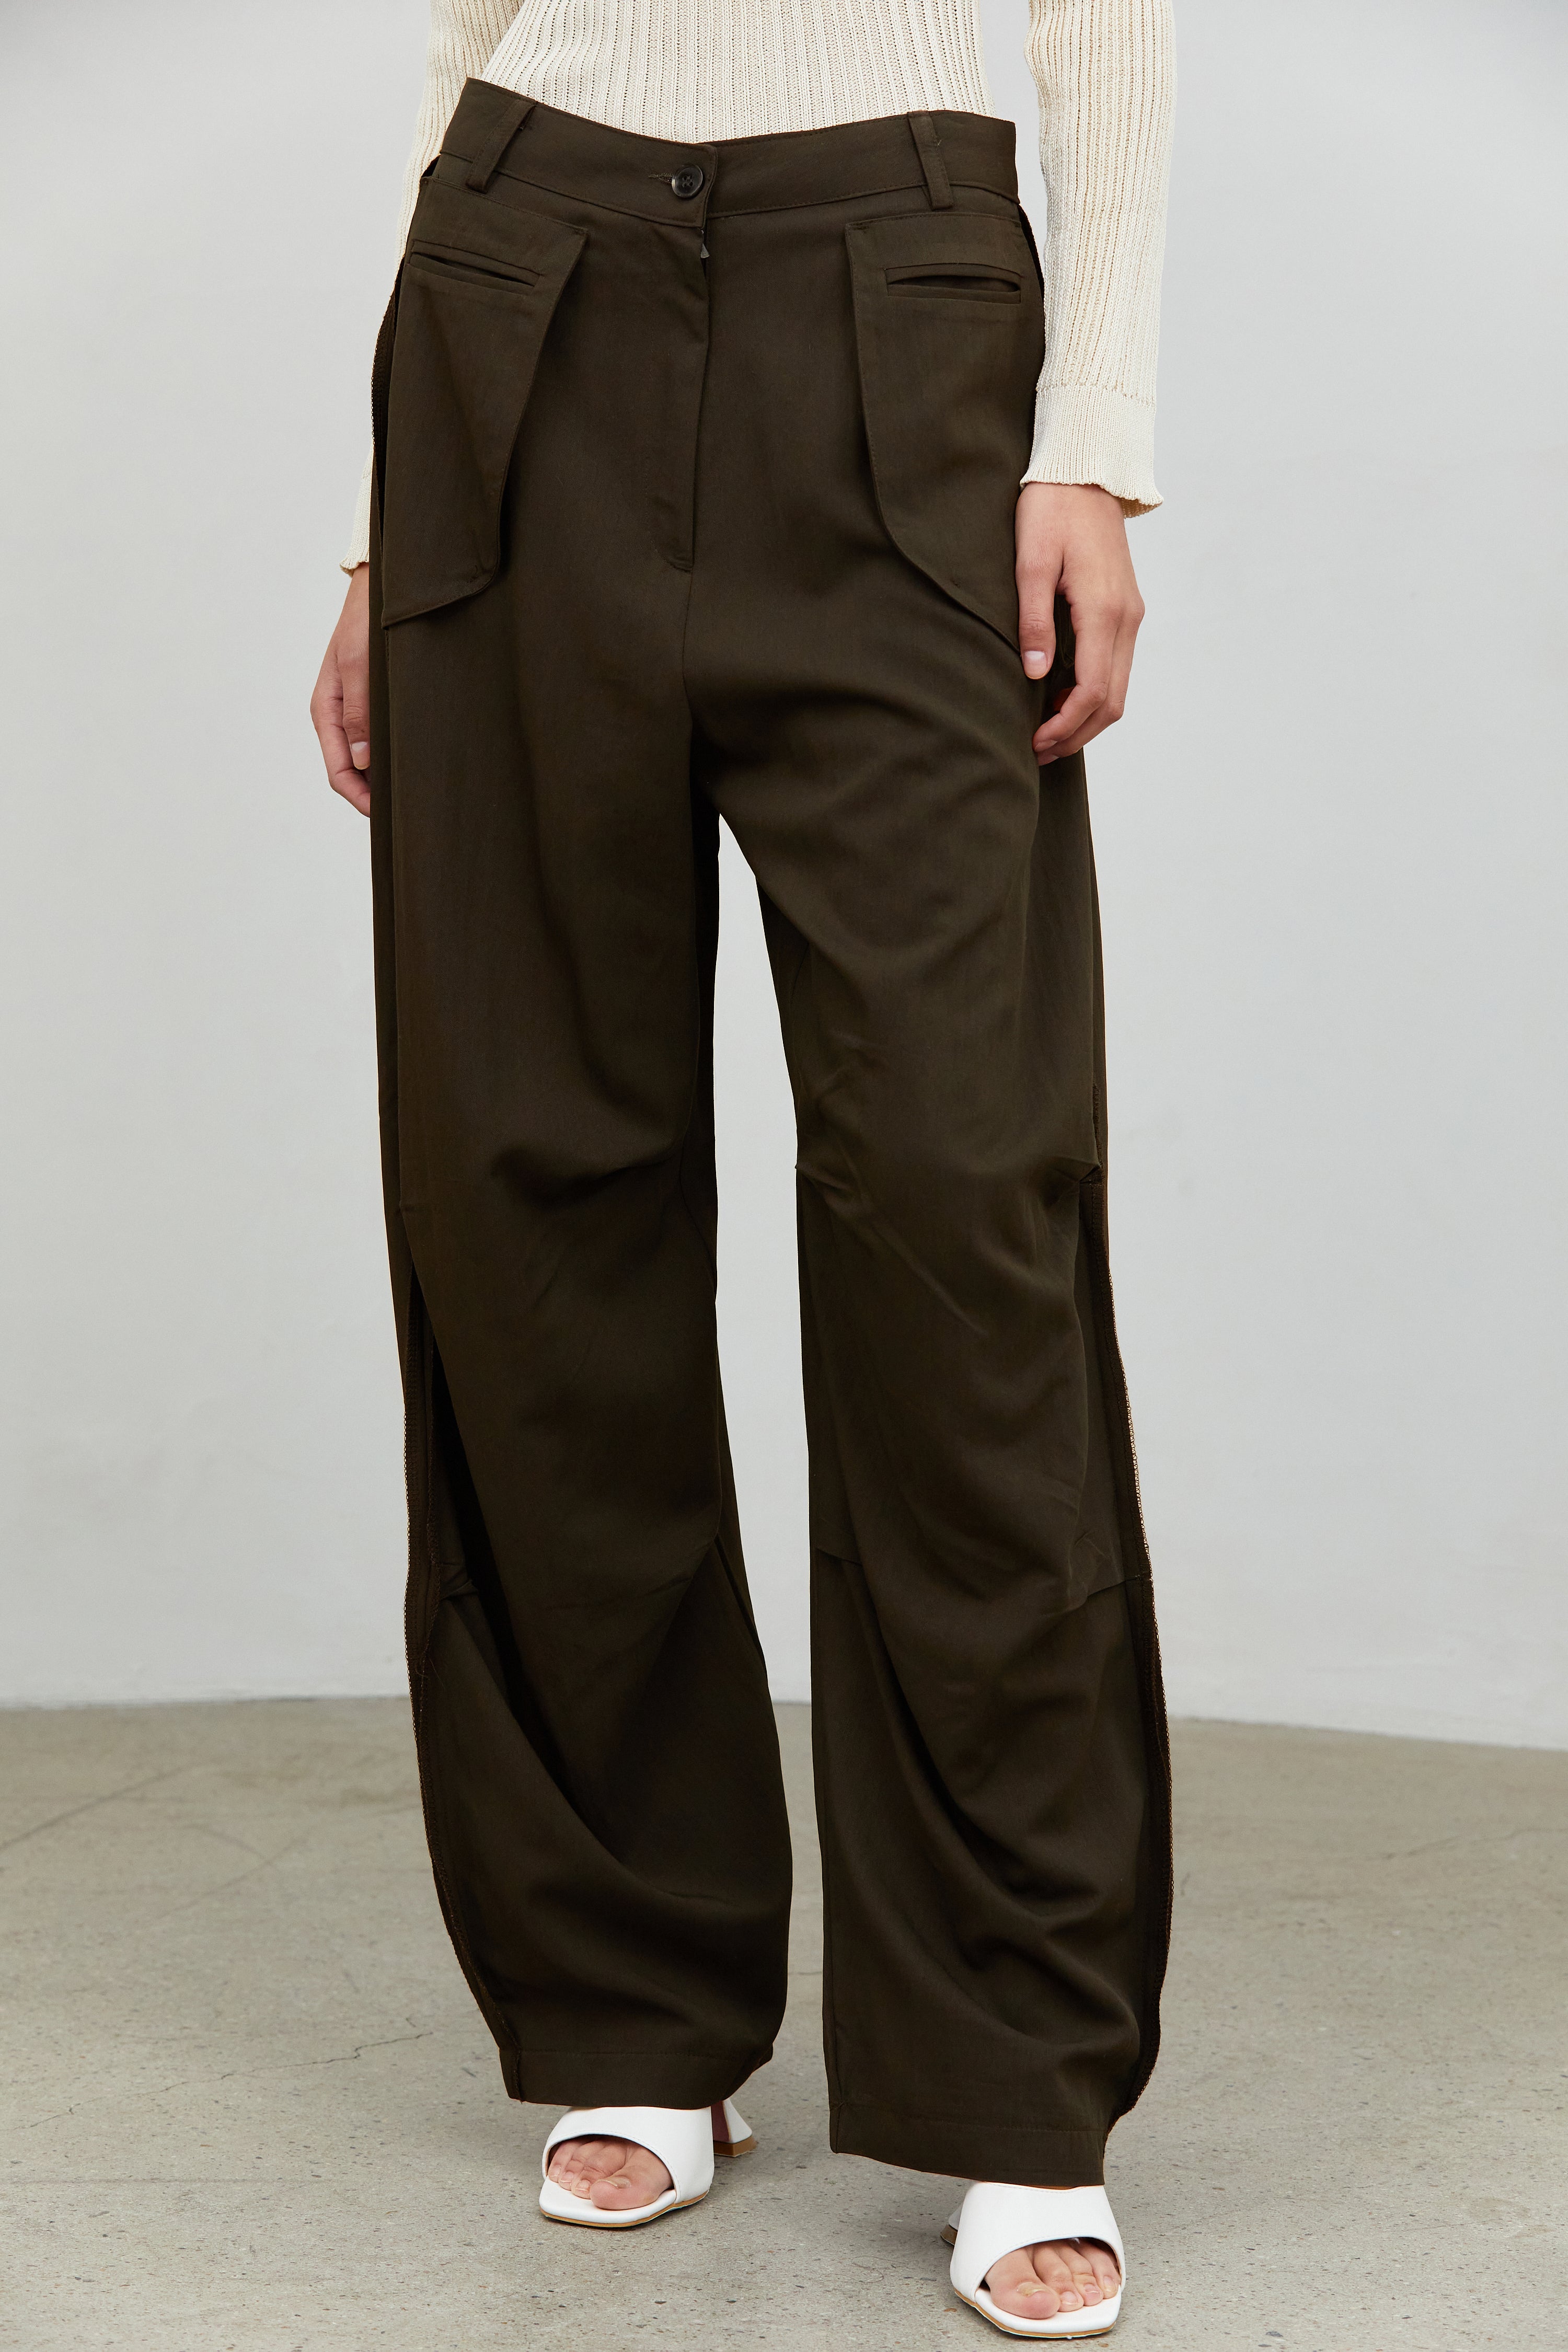 Inside Out Draped Cargo Pants, Walnut – SourceUnknown